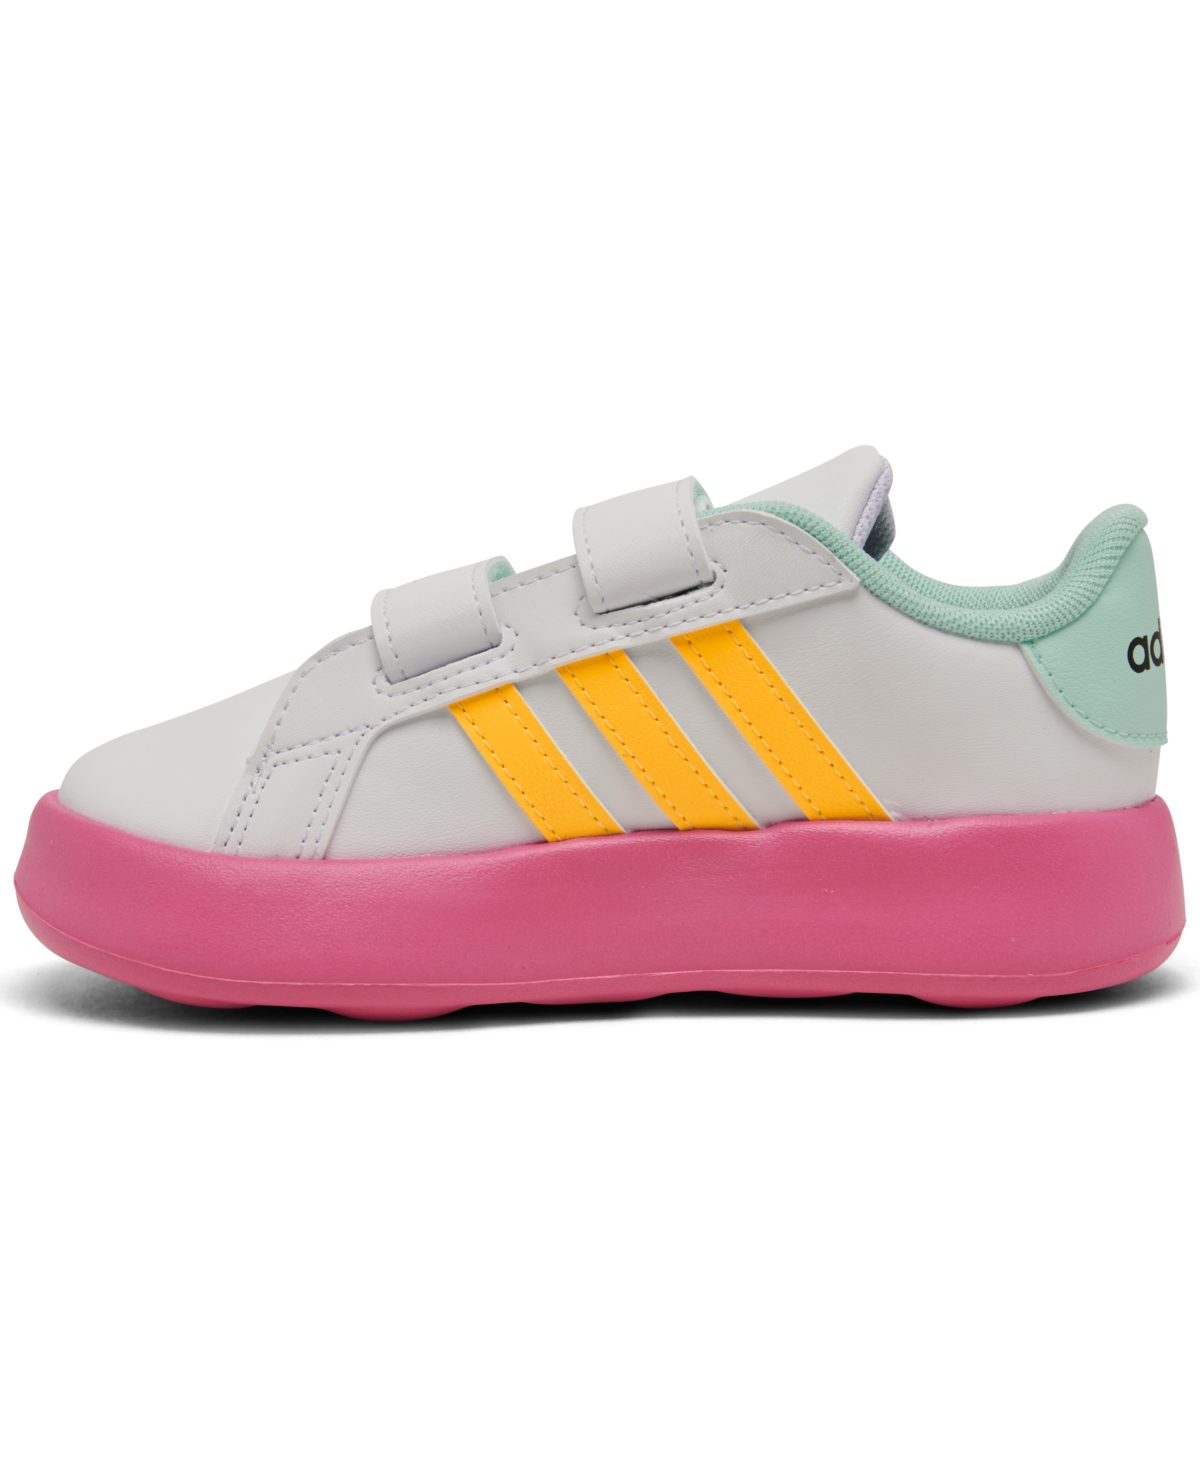 Shop Adidas Originals X Disney Minnie Mouse Toddler Girls Grand Court Fastening Strap Casual Sneakers From Finish Line In White,yellow,pink